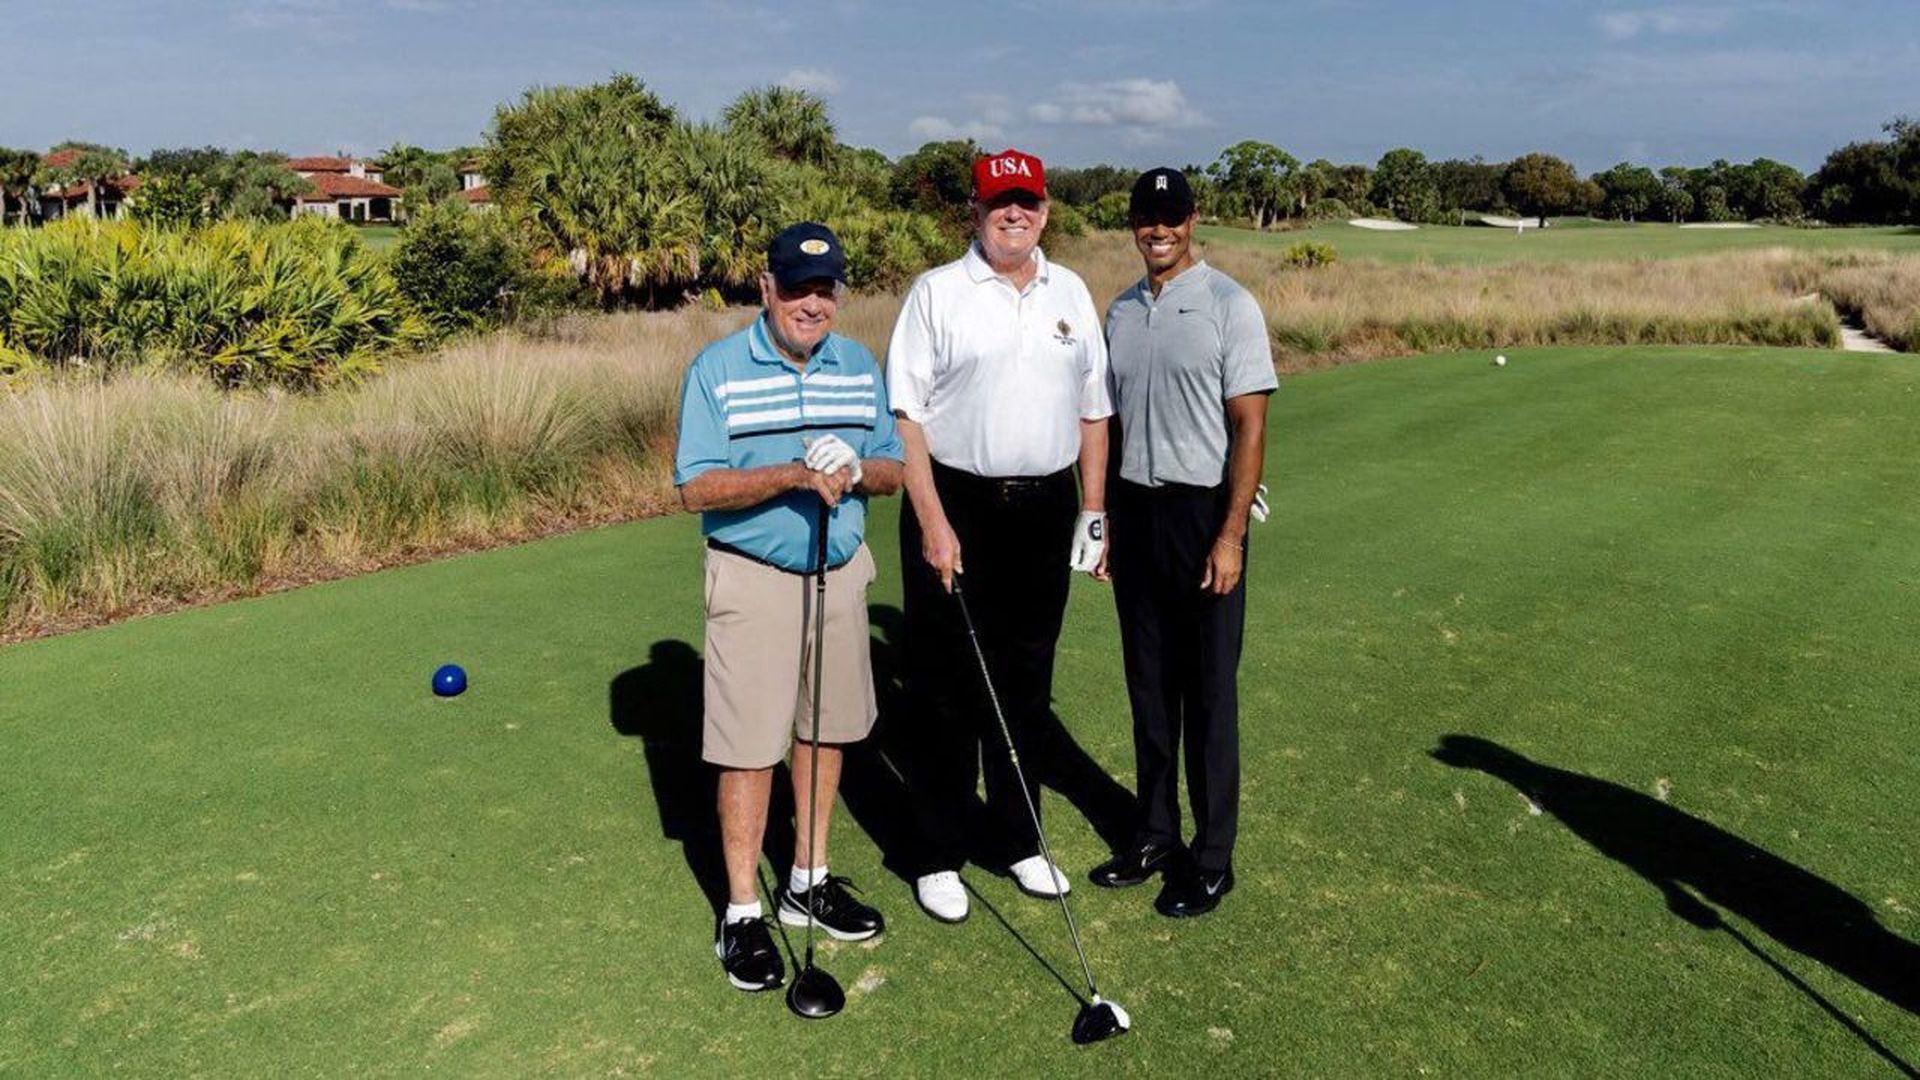 Trump tweeted this picture of him golfing yesterday with Jack Nicklaus and Tiger Woods in Jupiter, Fla.